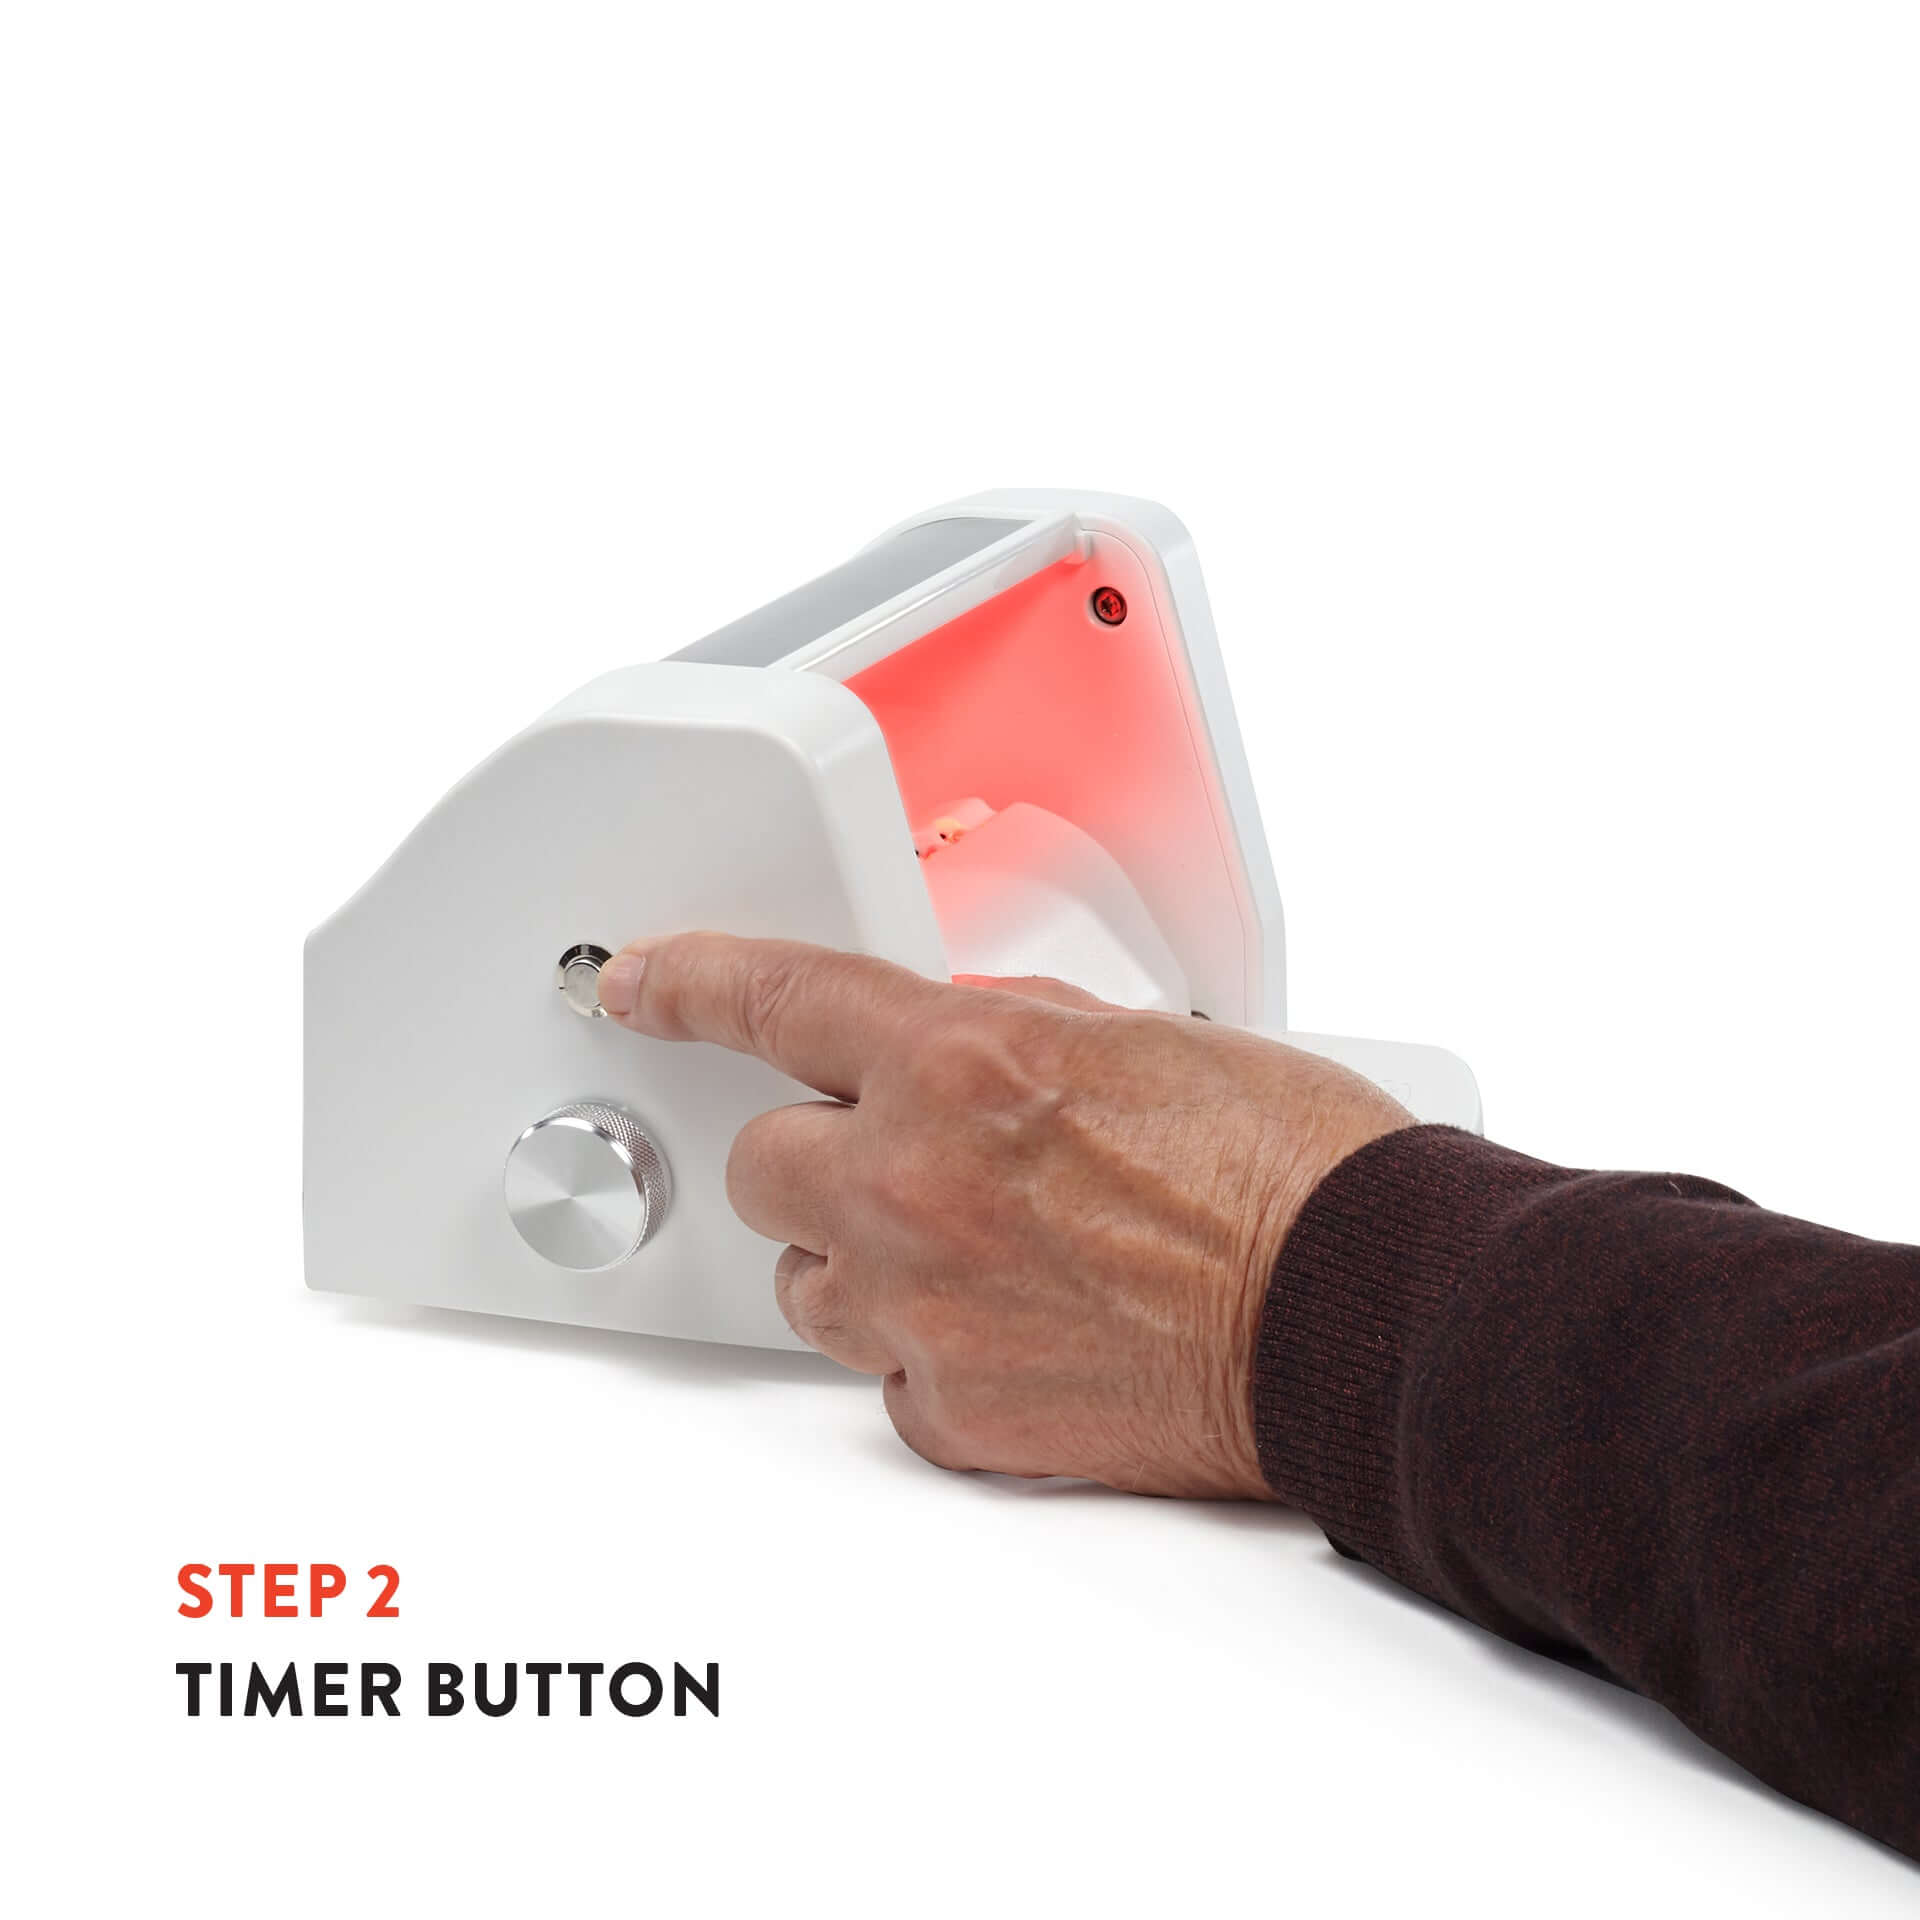 Timer button on the Triumph Hand Therapy Device